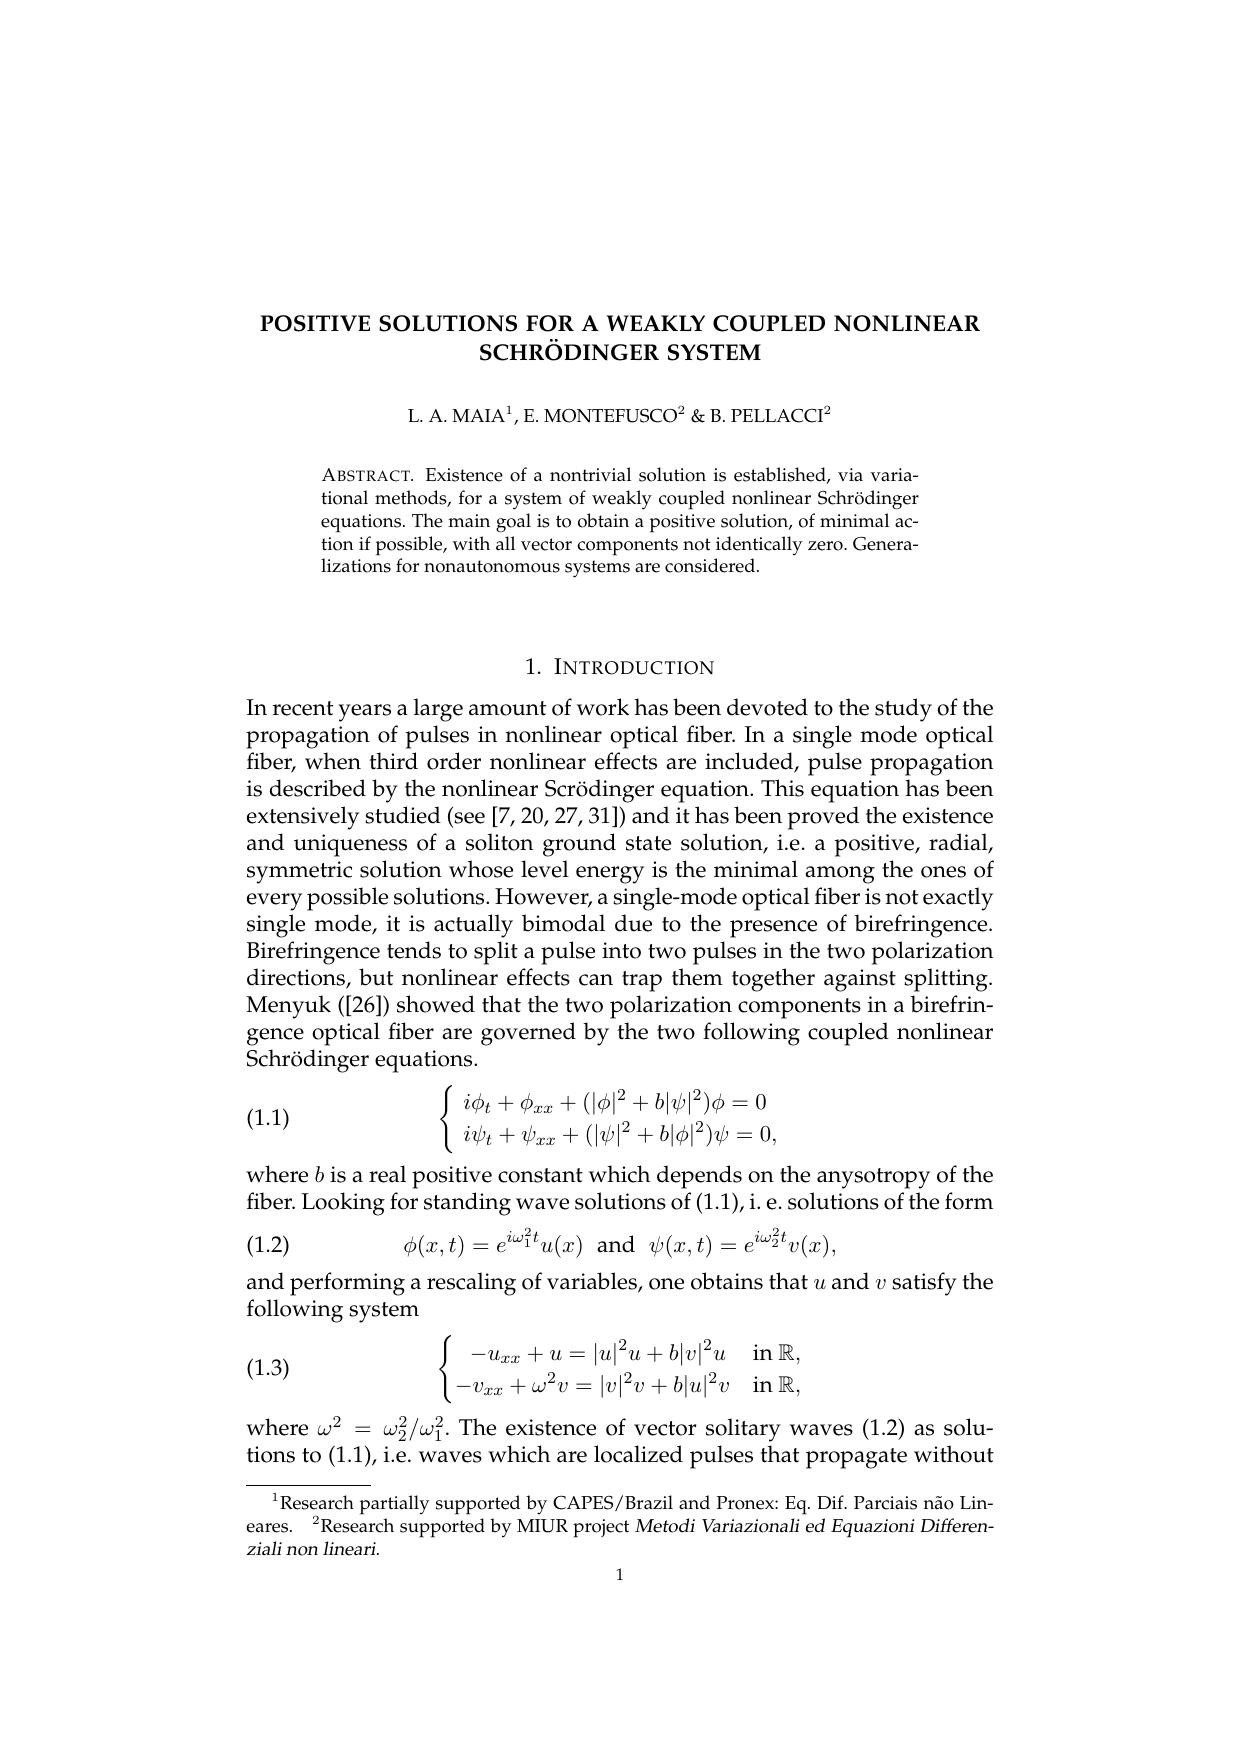 Positive solutions for a weakly coupled nonlinear Schrodinger system - Paper